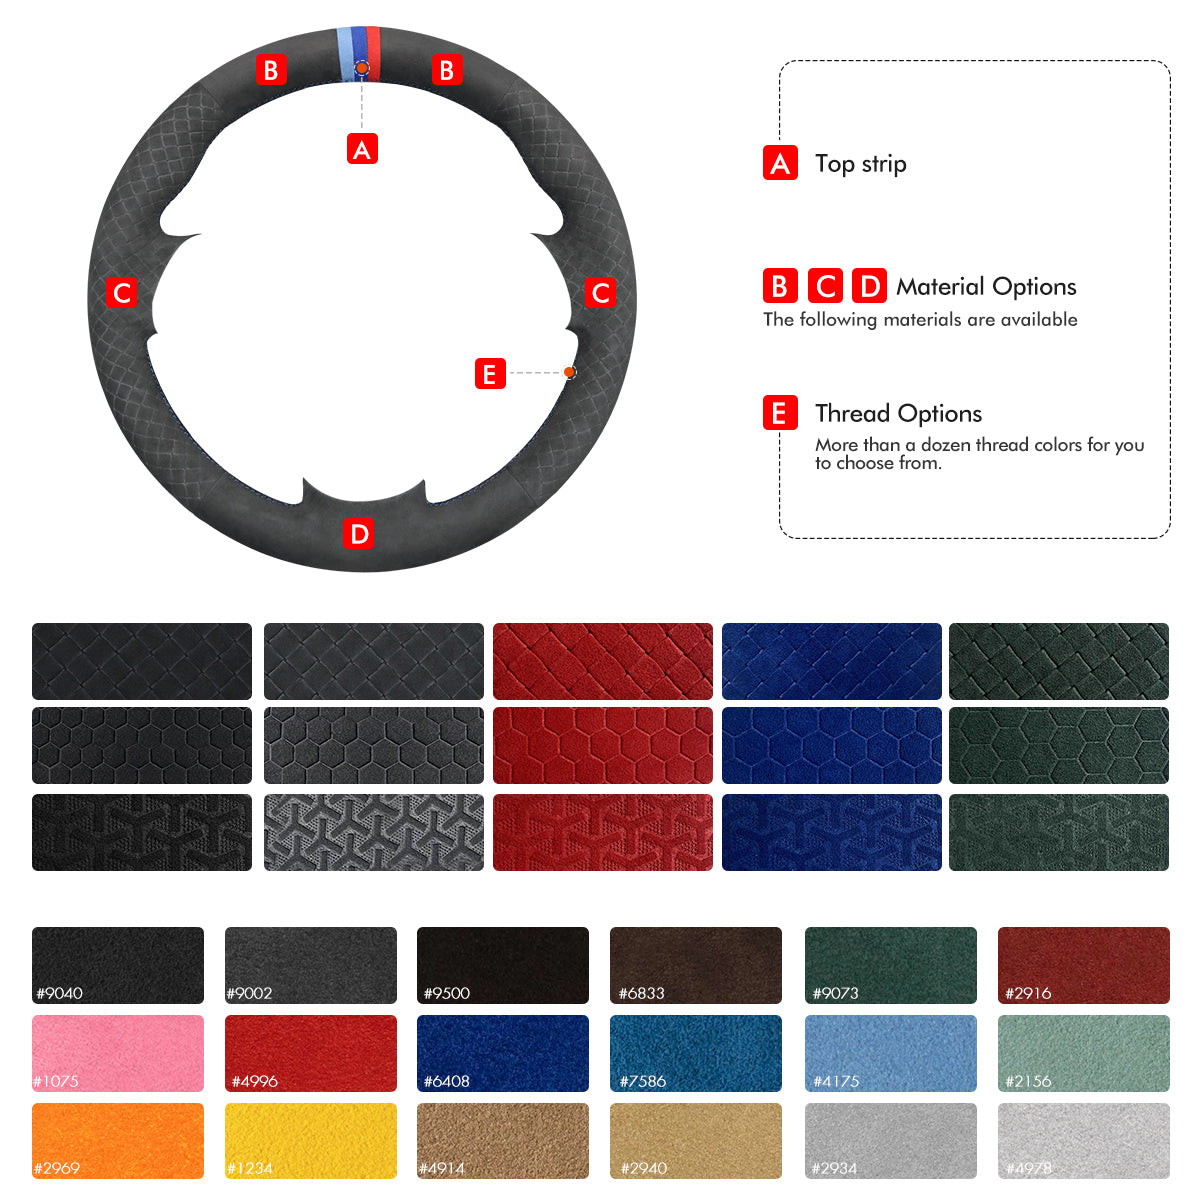 MEWANT Hand Stitch Car Steering Wheel Cover for Kia Sportage 3 / Ceed Cee'd / Proceed Pro ceed